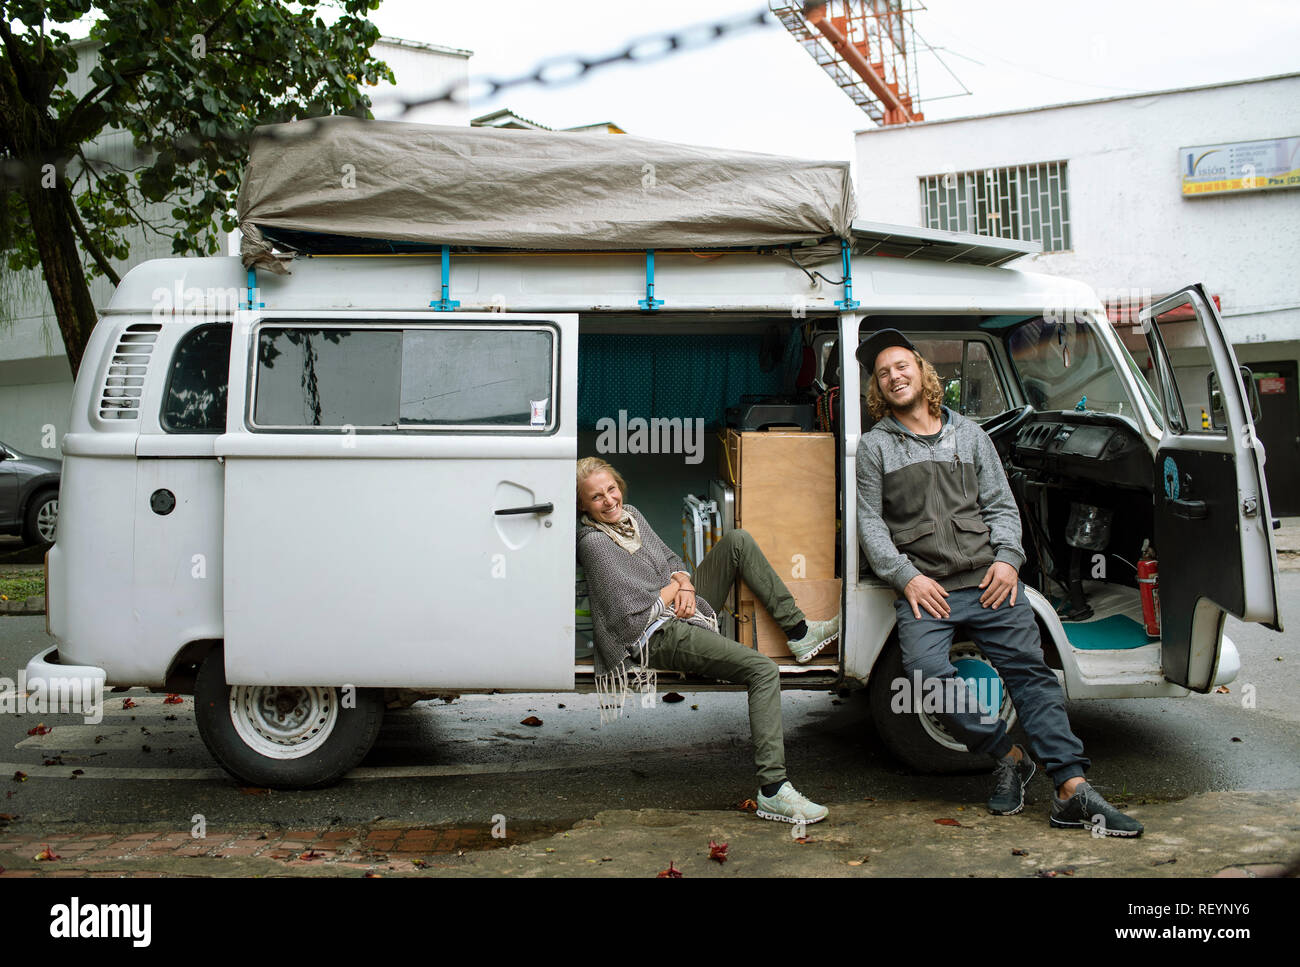 Volkswagen Camper van with a young European travelling couple. Travel lifestyle (environmental portrait, editorial use). Medellín, Colombia. Sep 2018 Stock Photo